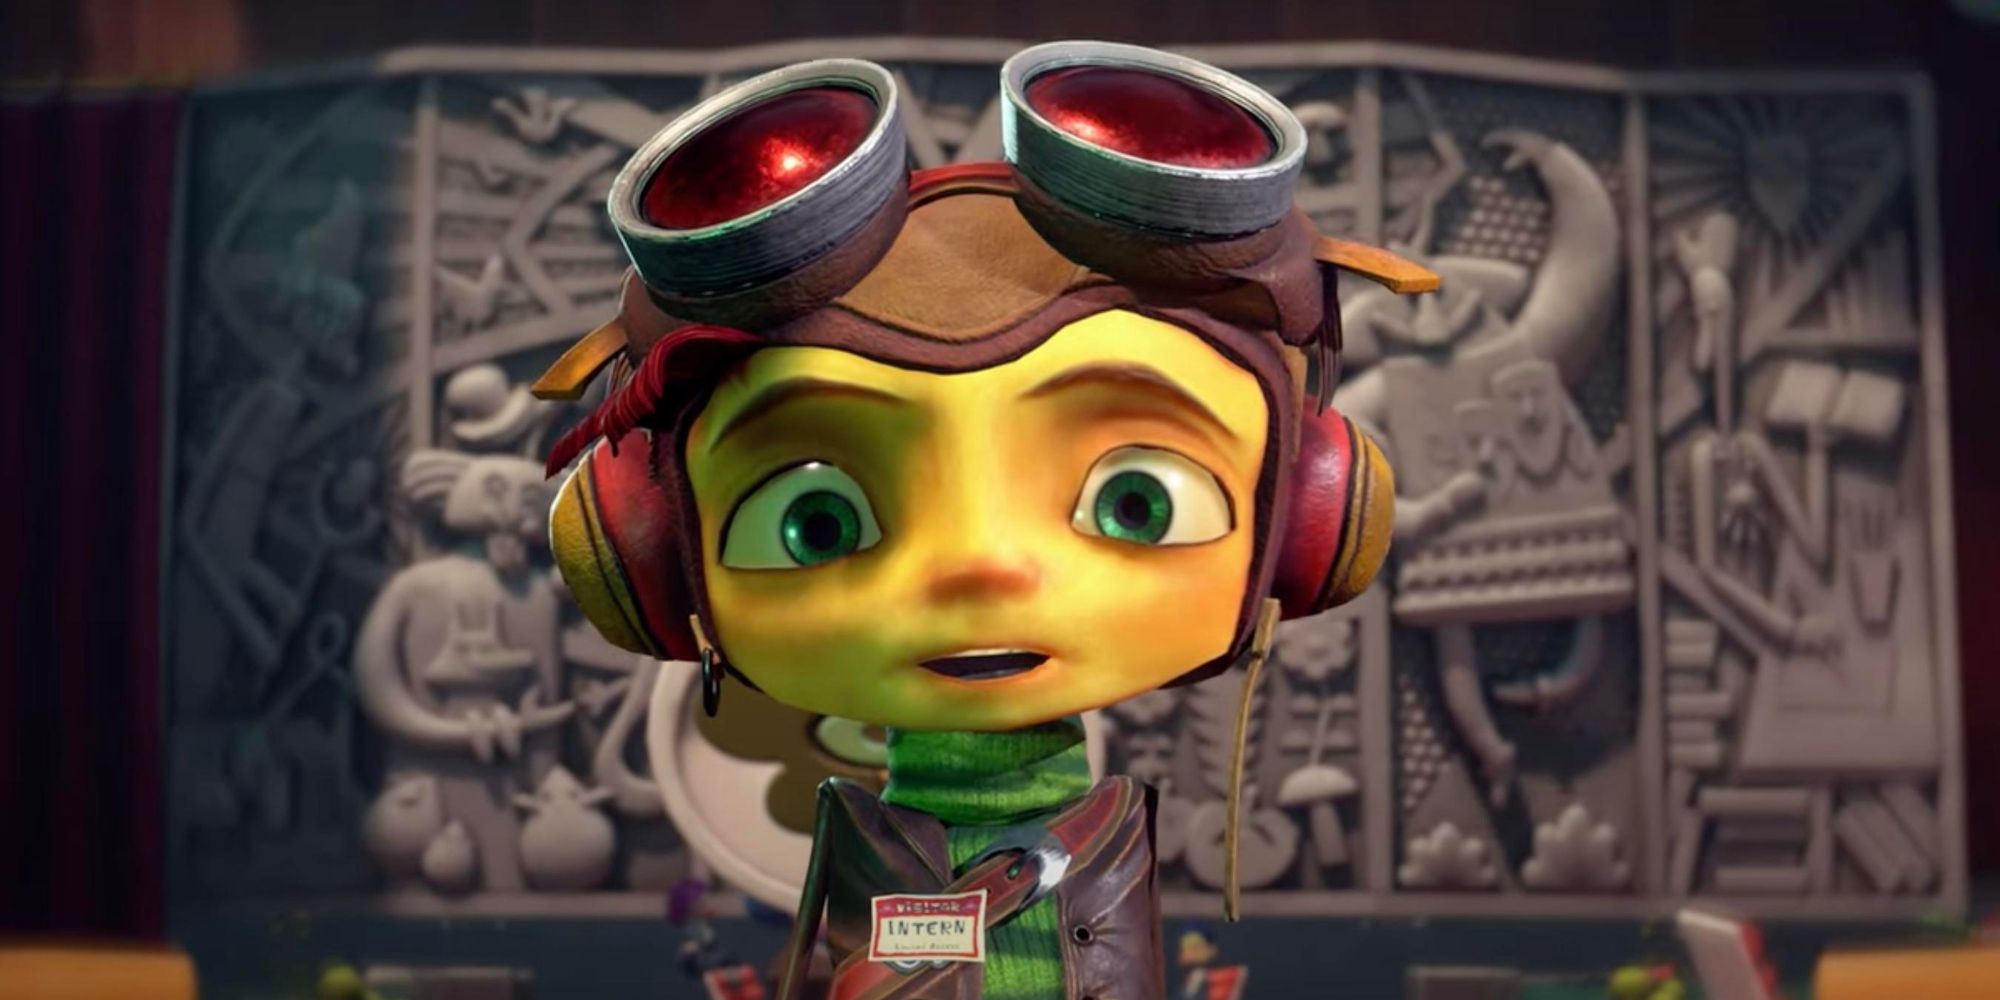 Psychonauts 2 Collector's Edition Rewards Fans With Tons of Cut Content